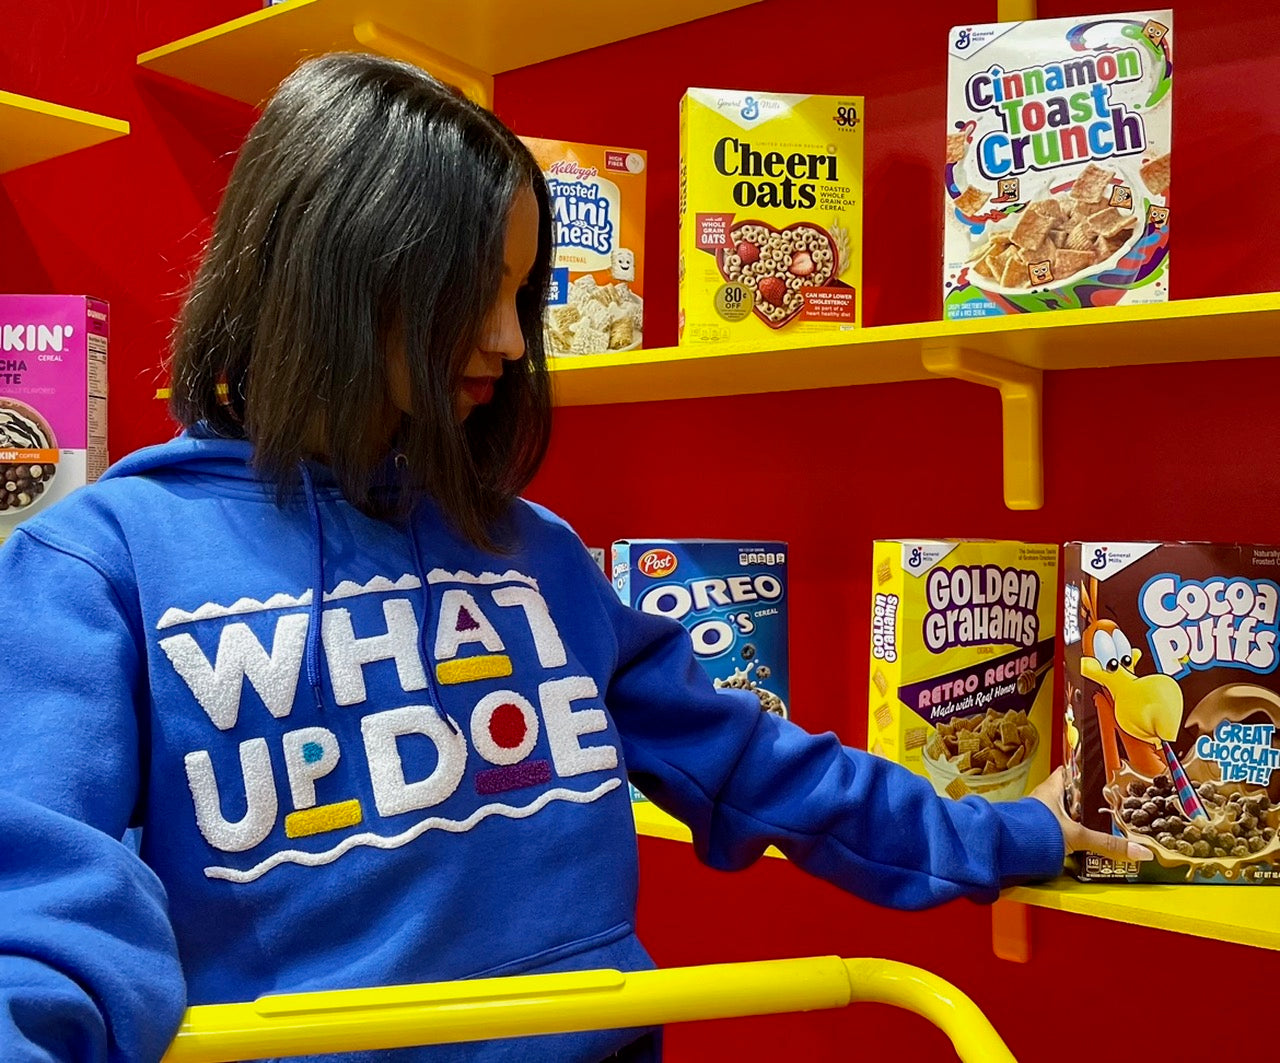 “Whad Up Doe” Royal Blue Chenille Hoodie